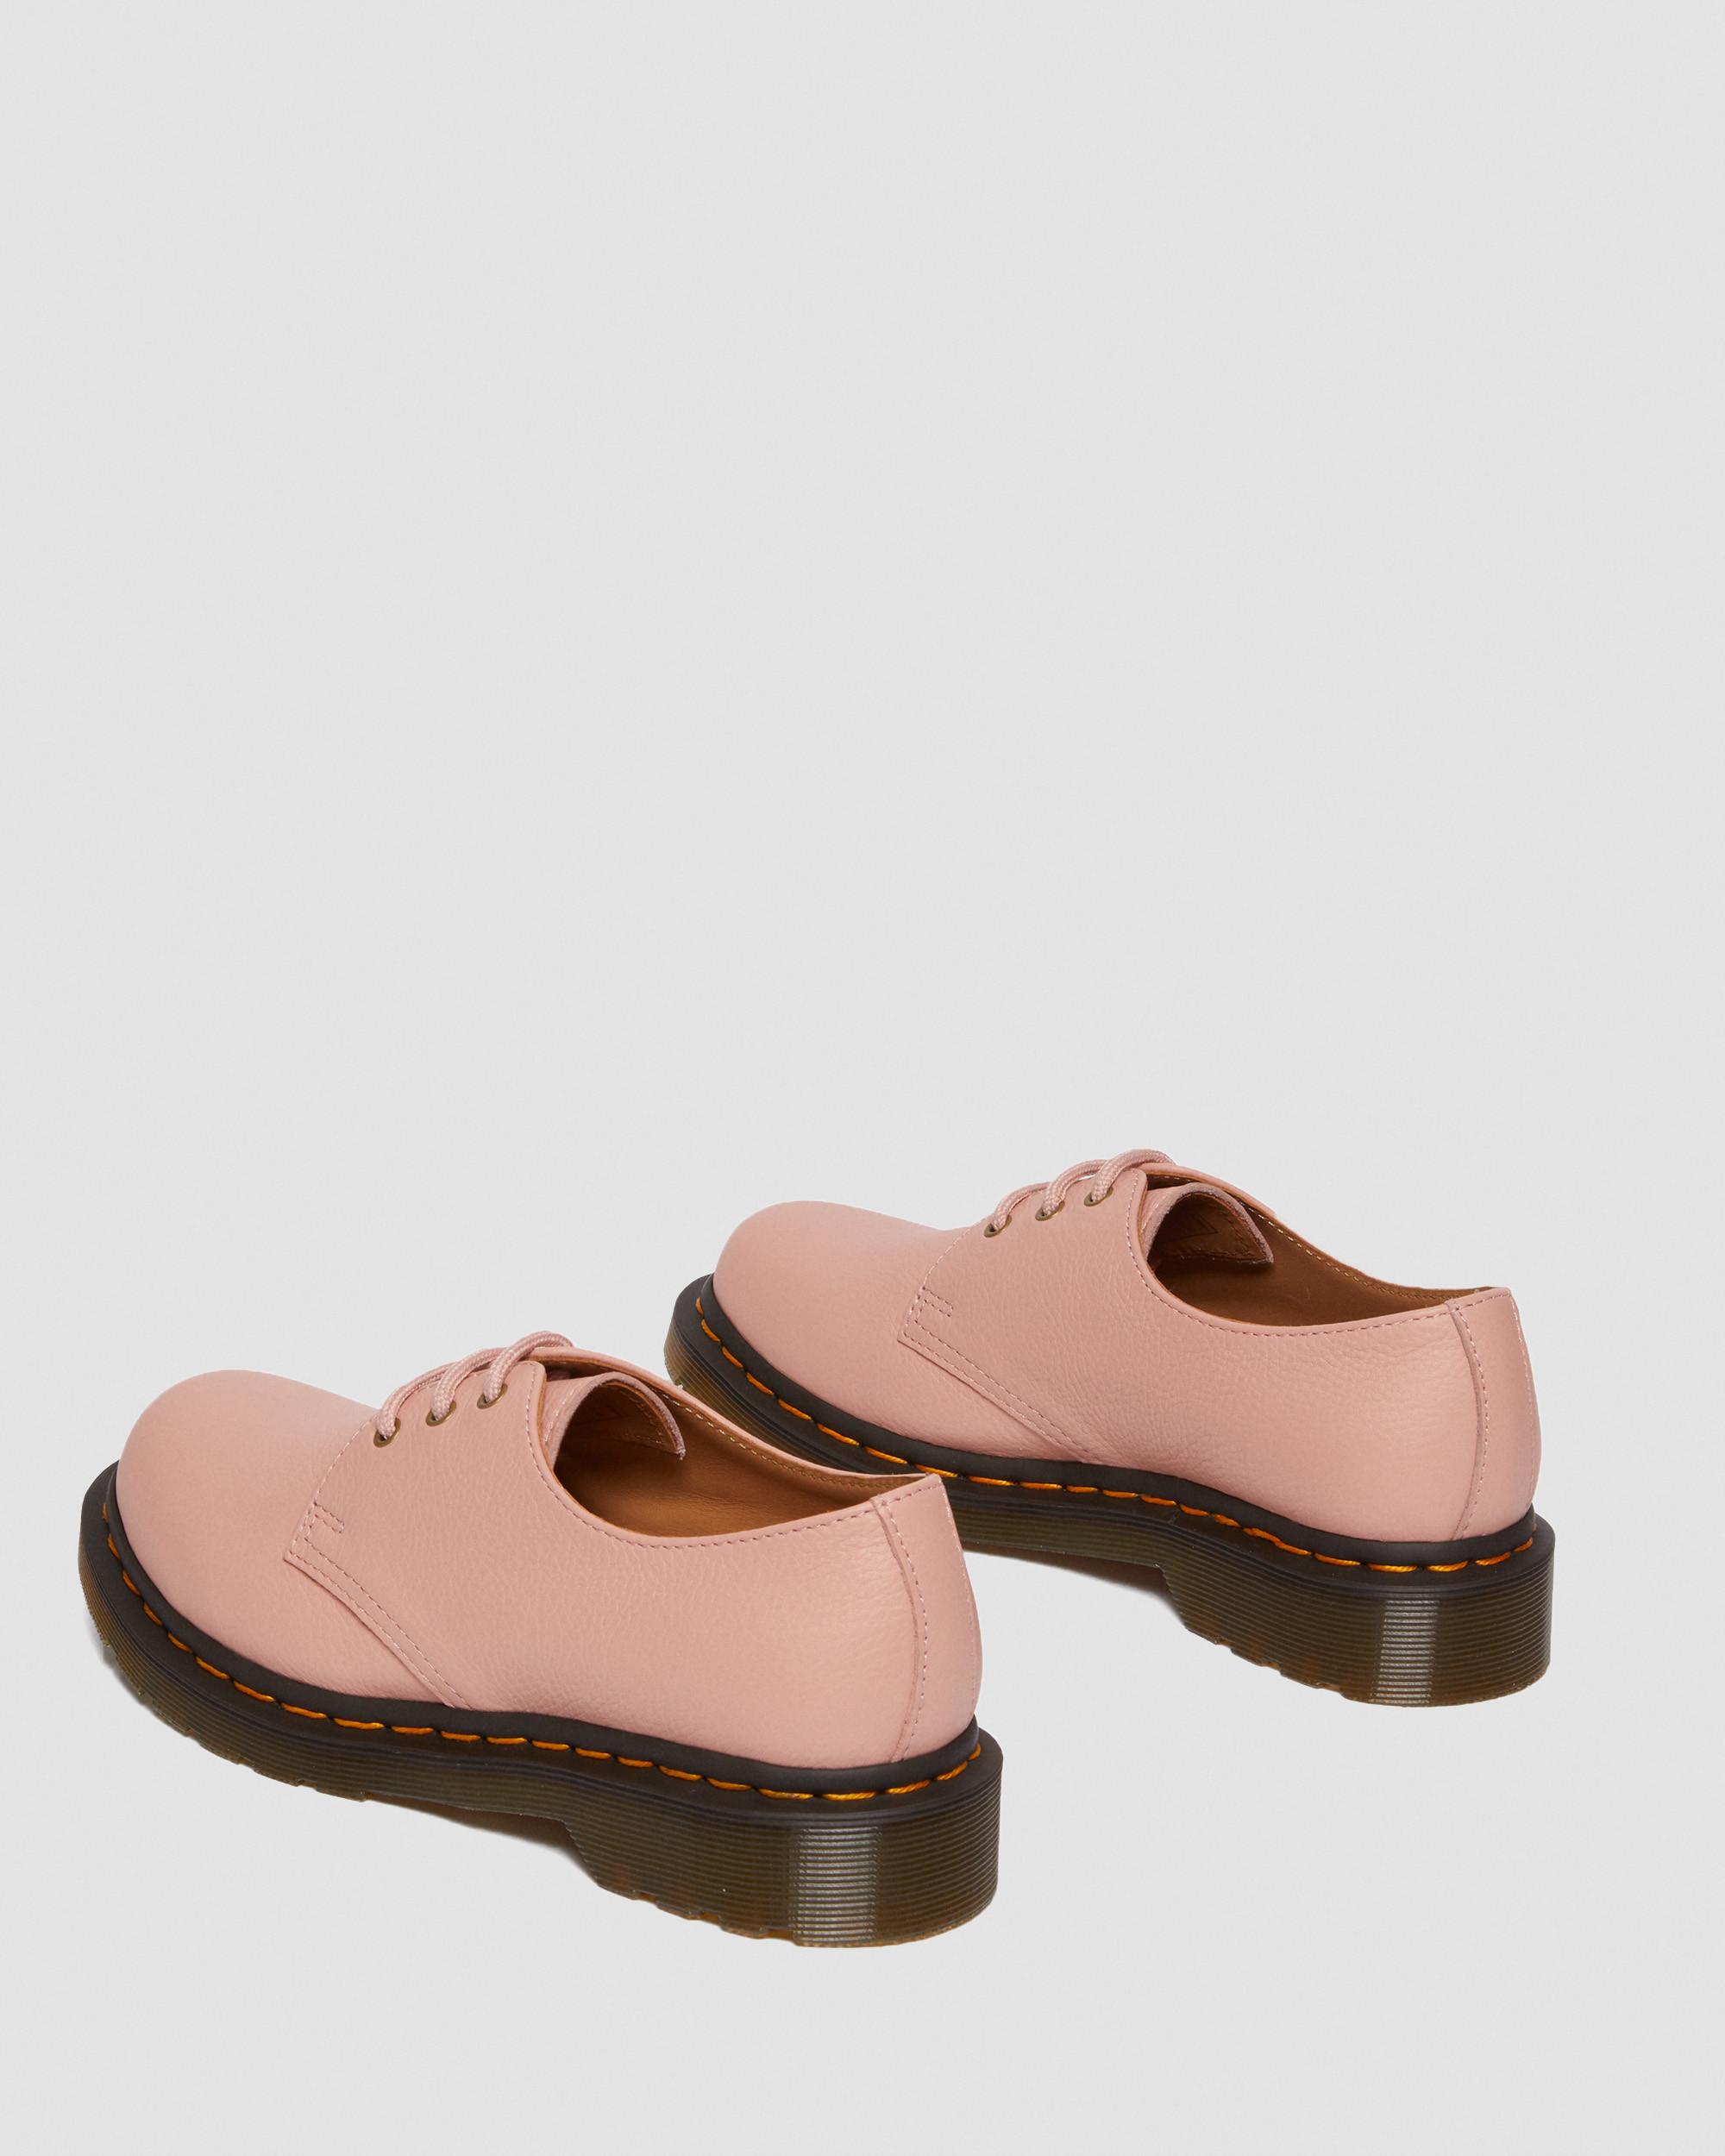 1461 Women's Virginia Leather Oxford Shoes in Peach Beige